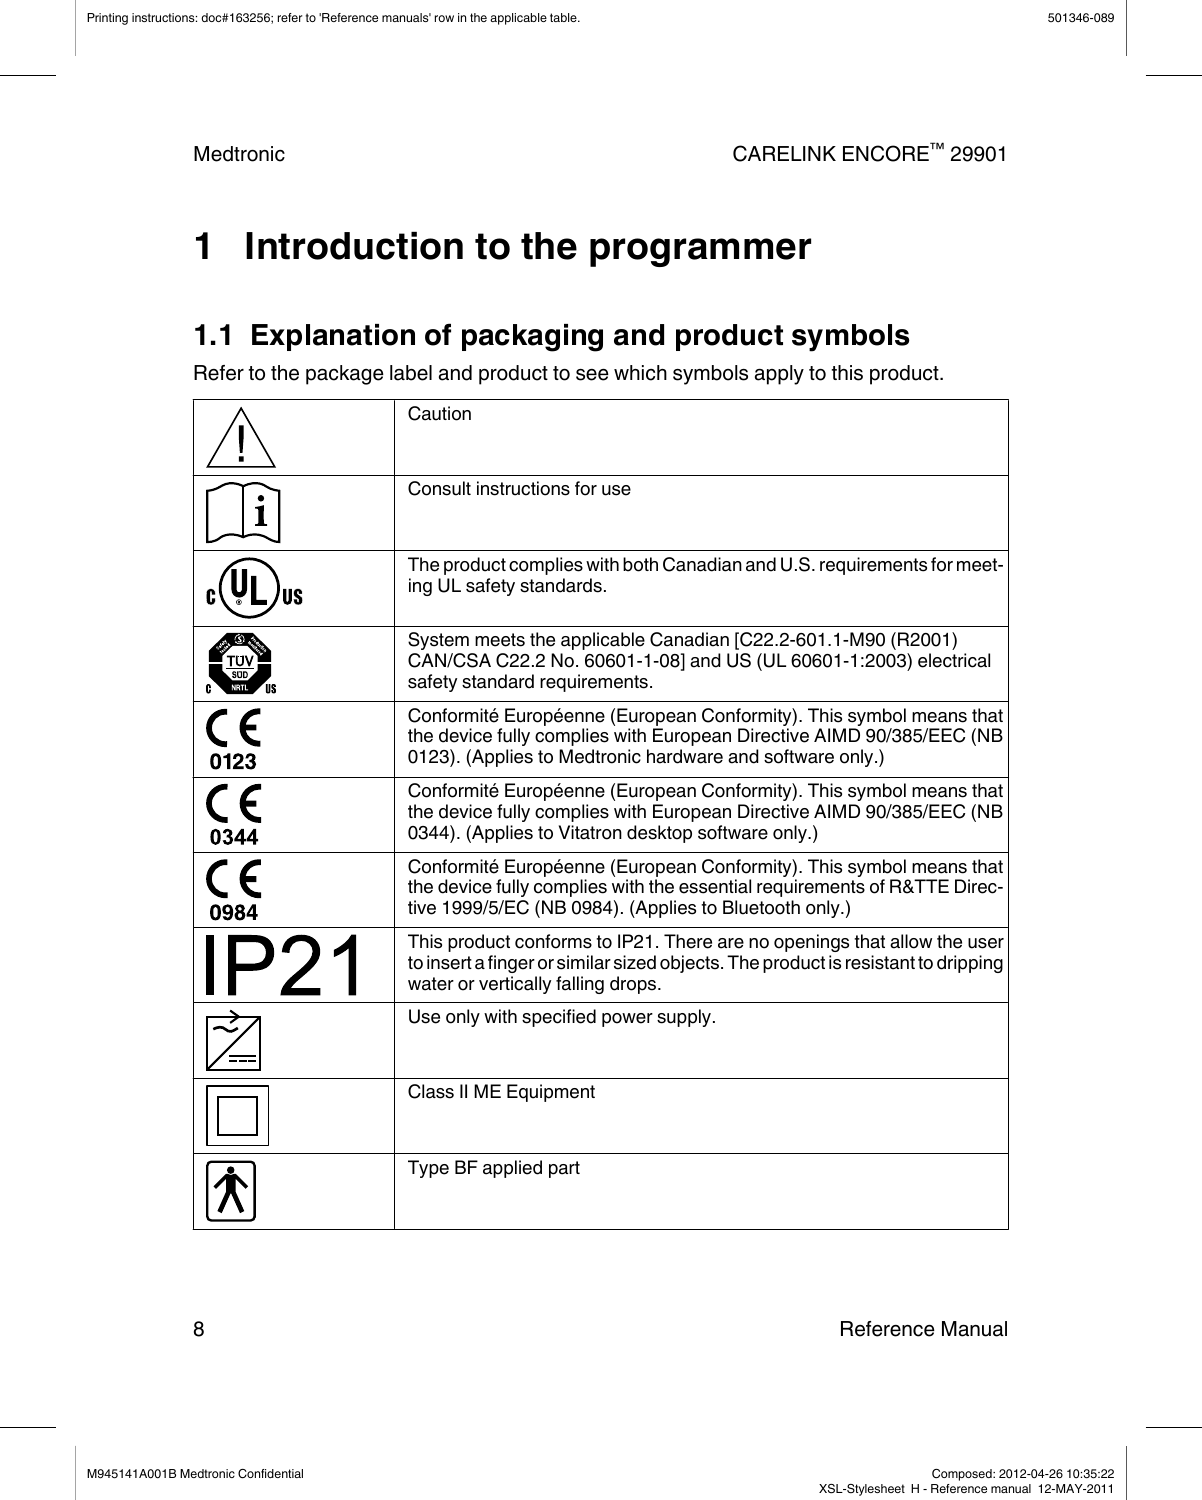 1   Introduction to the programmer1.1  Explanation of packaging and product symbolsRefer to the package label and product to see which symbols apply to this product.CautionConsult instructions for useThe product complies with both Canadian and U.S. requirements for meet-ing UL safety standards.System meets the applicable Canadian [C22.2-601.1-M90 (R2001)CAN/CSA C22.2 No. 60601-1-08] and US (UL 60601-1:2003) electricalsafety standard requirements.Conformité Européenne (European Conformity). This symbol means thatthe device fully complies with European Directive AIMD 90/385/EEC (NB0123). (Applies to Medtronic hardware and software only.)Conformité Européenne (European Conformity). This symbol means thatthe device fully complies with European Directive AIMD 90/385/EEC (NB0344). (Applies to Vitatron desktop software only.)Conformité Européenne (European Conformity). This symbol means thatthe device fully complies with the essential requirements of R&amp;TTE Direc-tive 1999/5/EC (NB 0984). (Applies to Bluetooth only.)This product conforms to IP21. There are no openings that allow the userto insert a finger or similar sized objects. The product is resistant to drippingwater or vertically falling drops.Use only with specified power supply.Class II ME EquipmentType BF applied partPrinting instructions: doc#163256; refer to &apos;Reference manuals&apos; row in the applicable table. 501346-089Medtronic CARELINK ENCORE™ 299018 Reference ManualM945141A001B Medtronic Confidential   Composed: 2012-04-26 10:35:22XSL-Stylesheet  H - Reference manual  12-MAY-2011